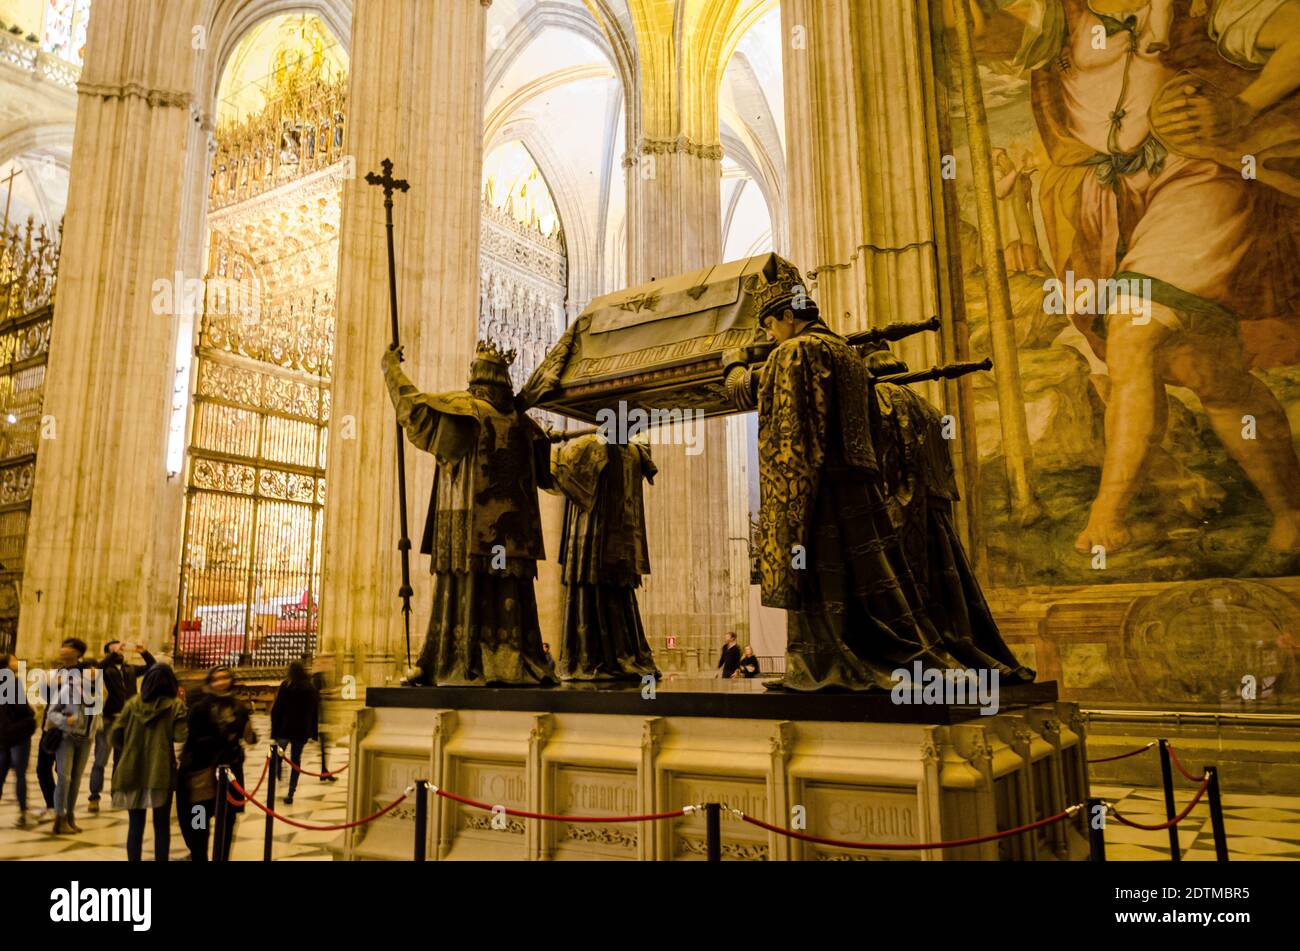 Inside Seville Cathedral, Spain Stock Photo